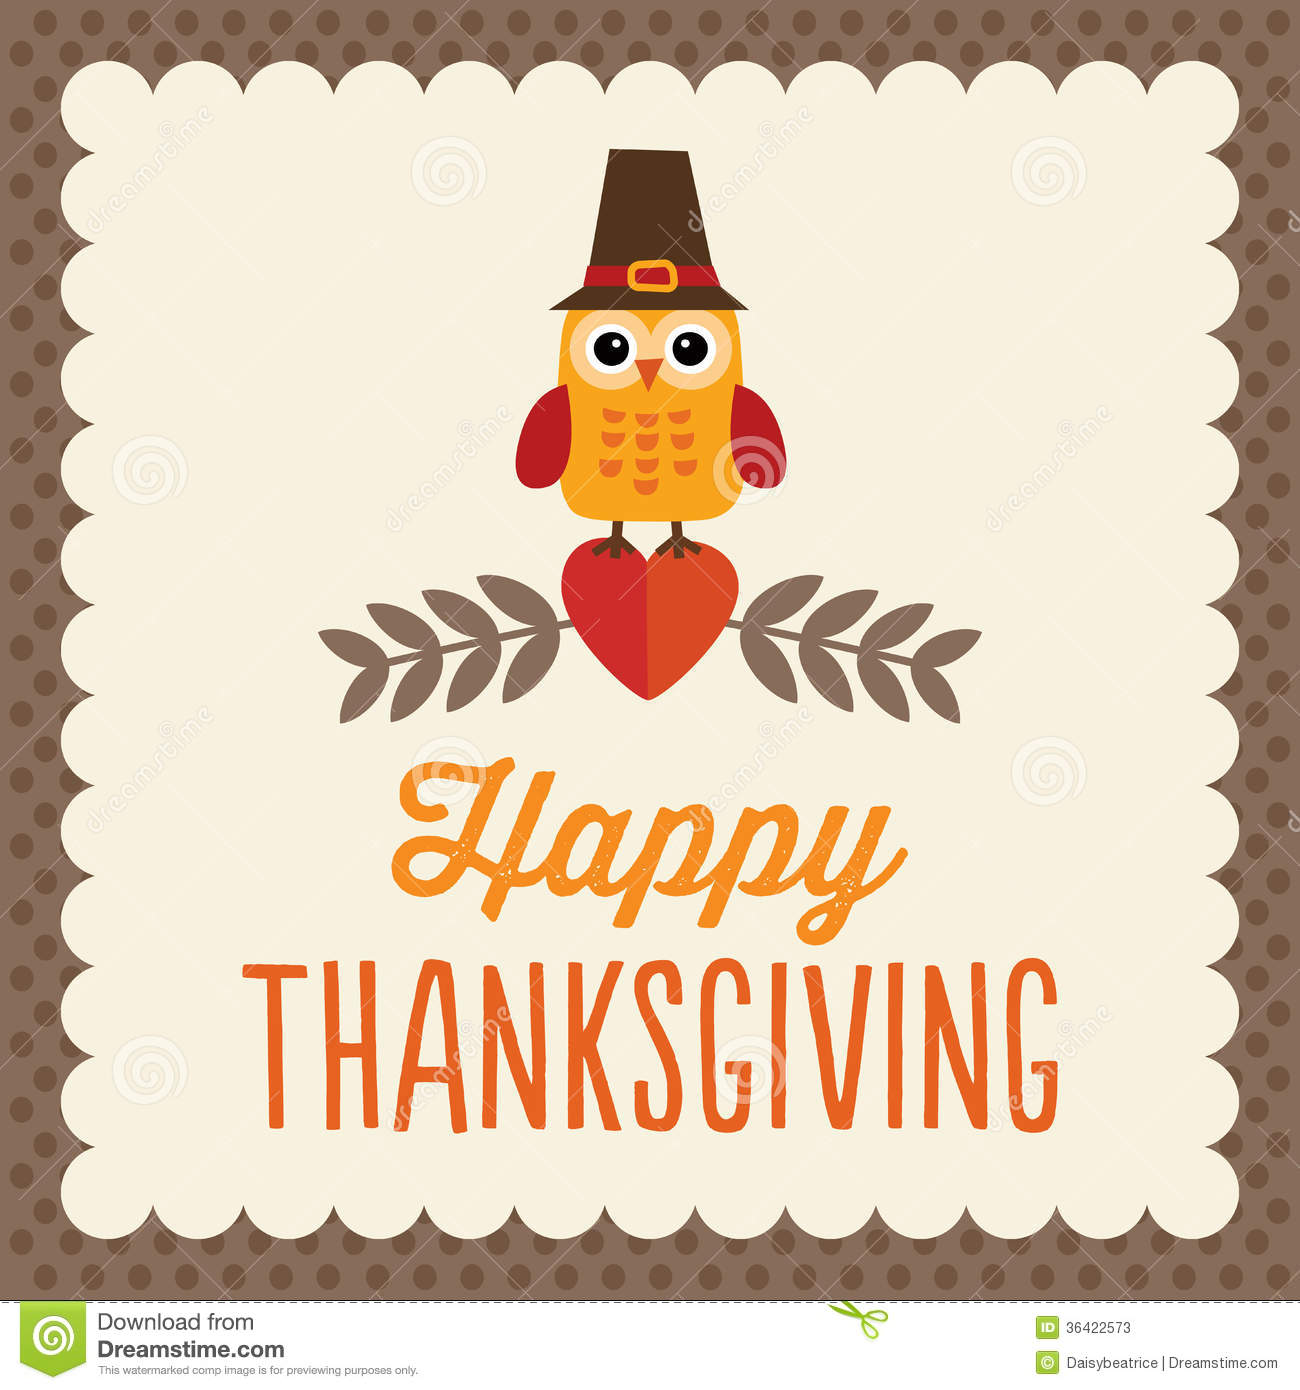     Thanksgiving Day Card Design With Cute Little Owl In Pilgrim Hat